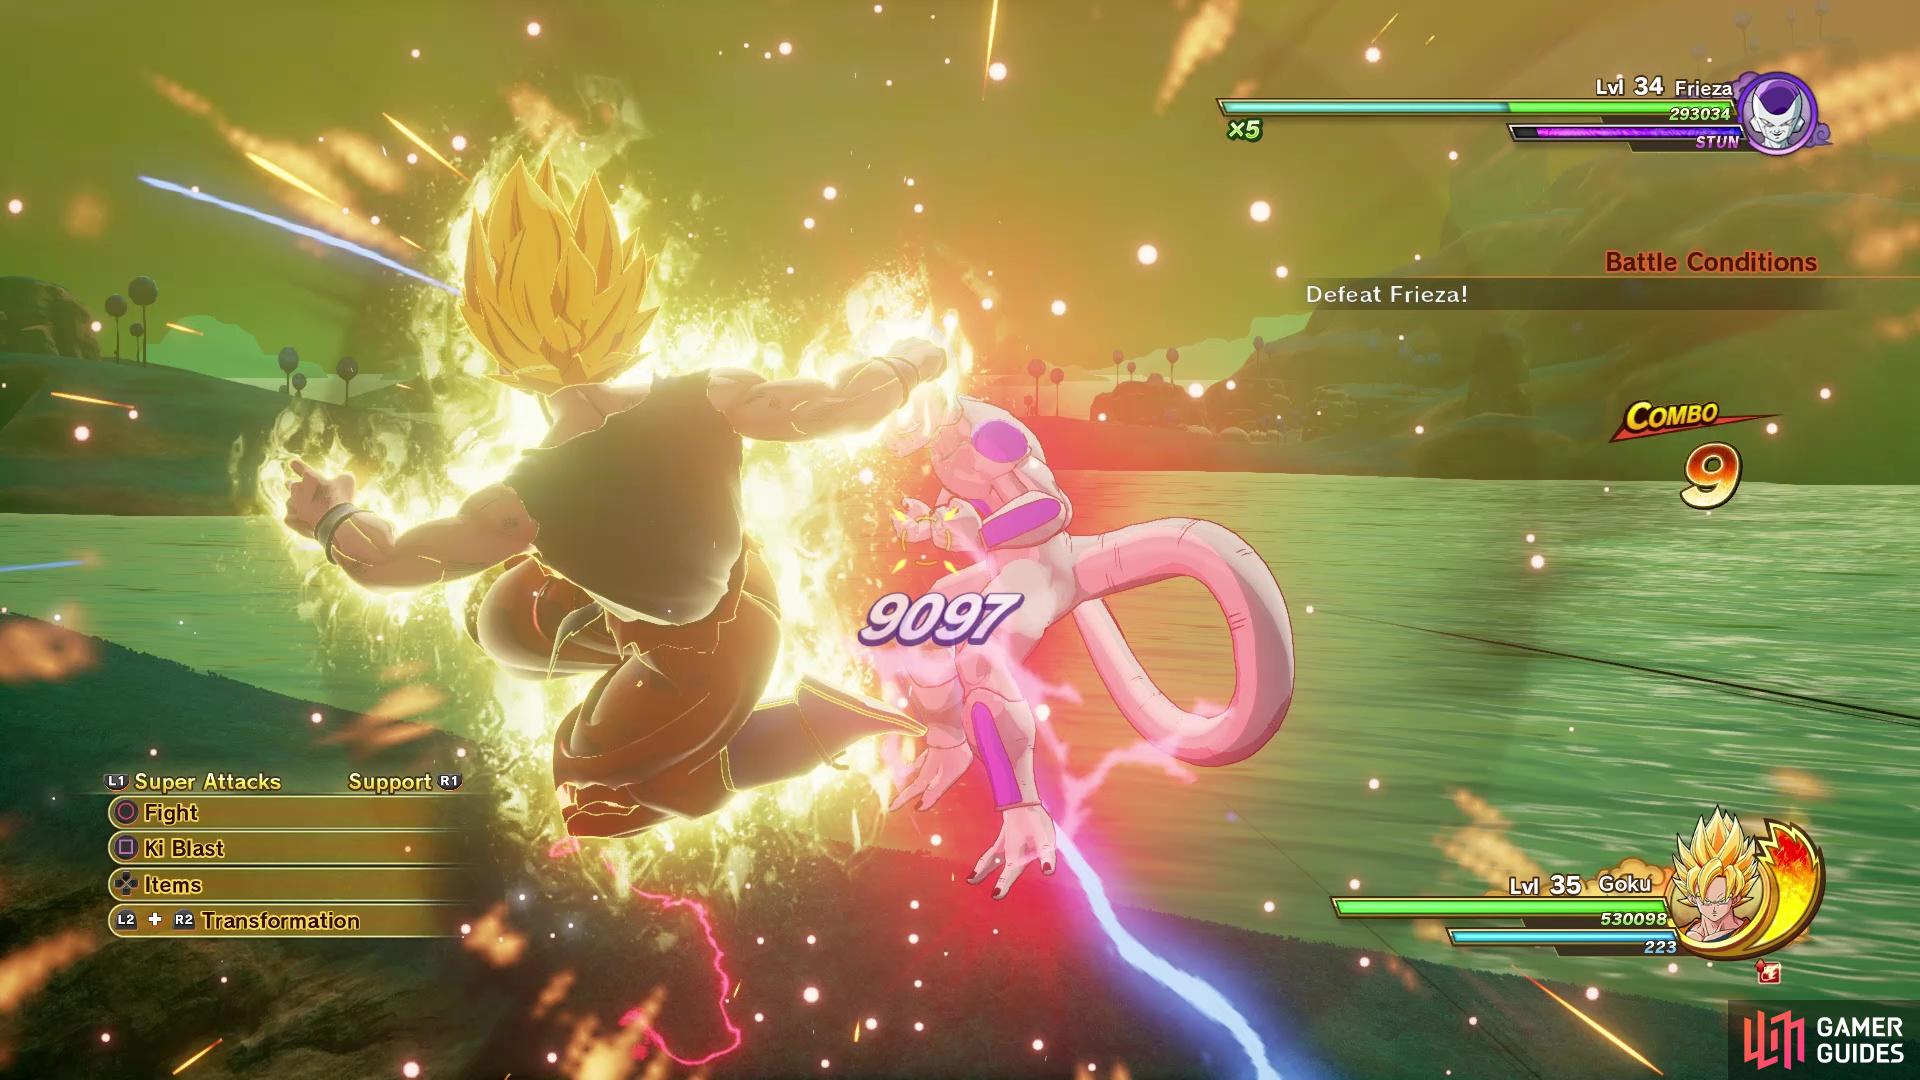 You should have no trouble with the first fight as Super Saiyan Goku